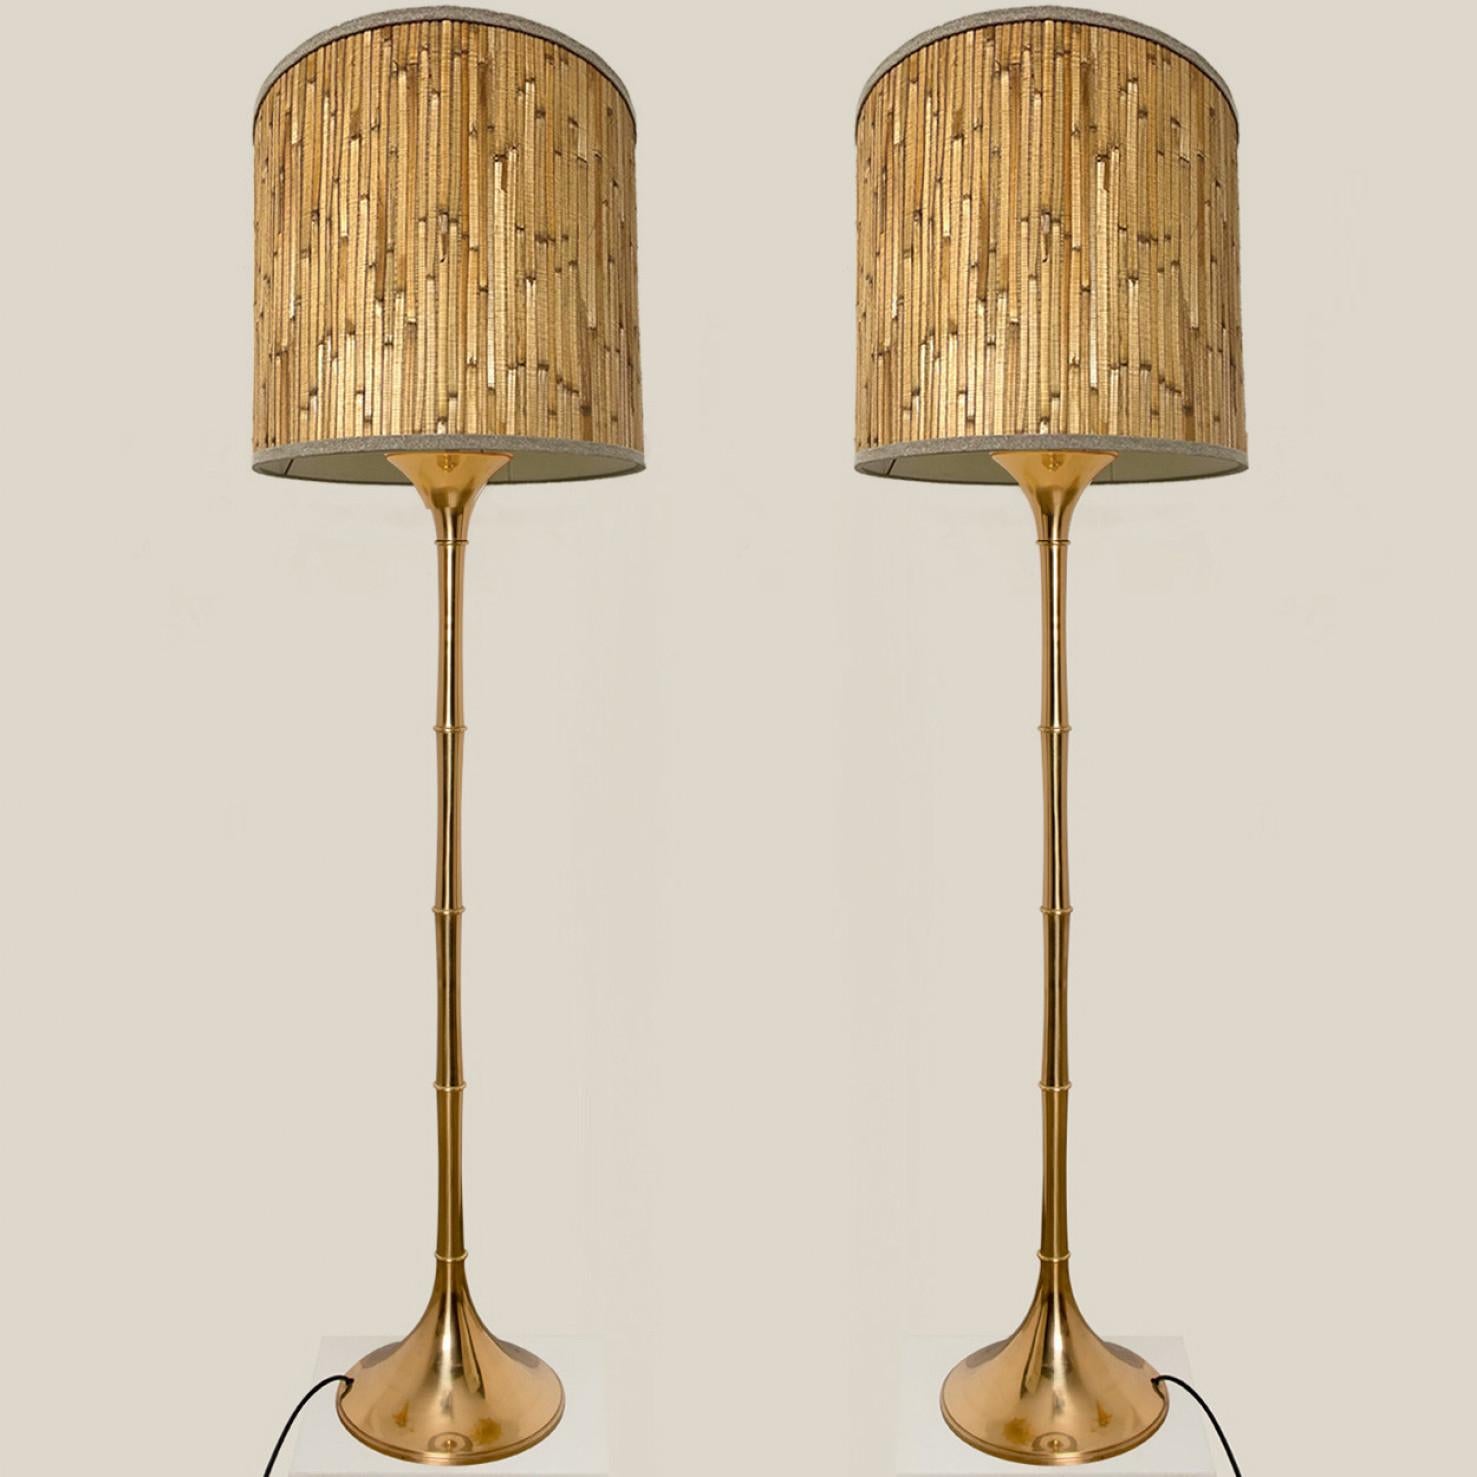 Pair of floor Lamps Gold Brass and Wood by Ingo Maurer, Europe, Germany, 1968 For Sale 9